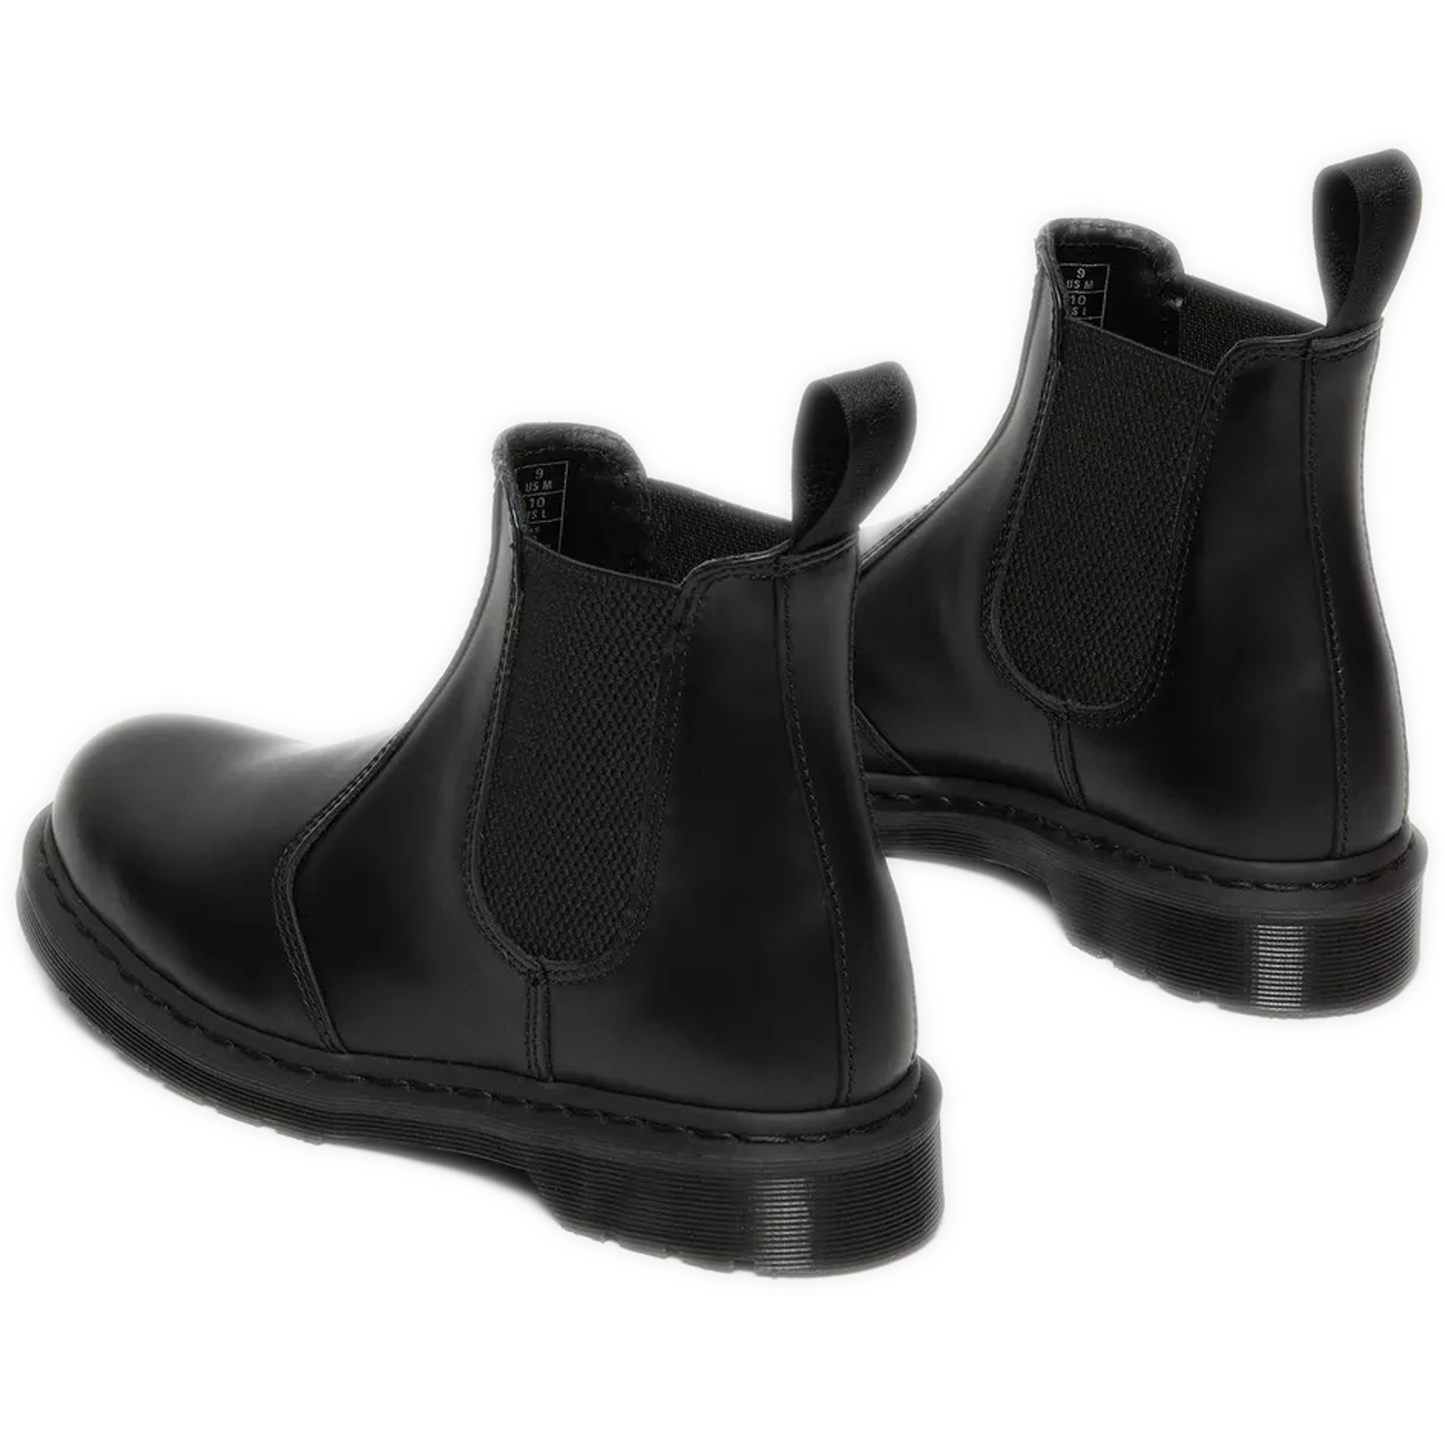 Women's Dr. Martens 2976 Mono Smooth Leather Chelsea Boots - Black Smooth